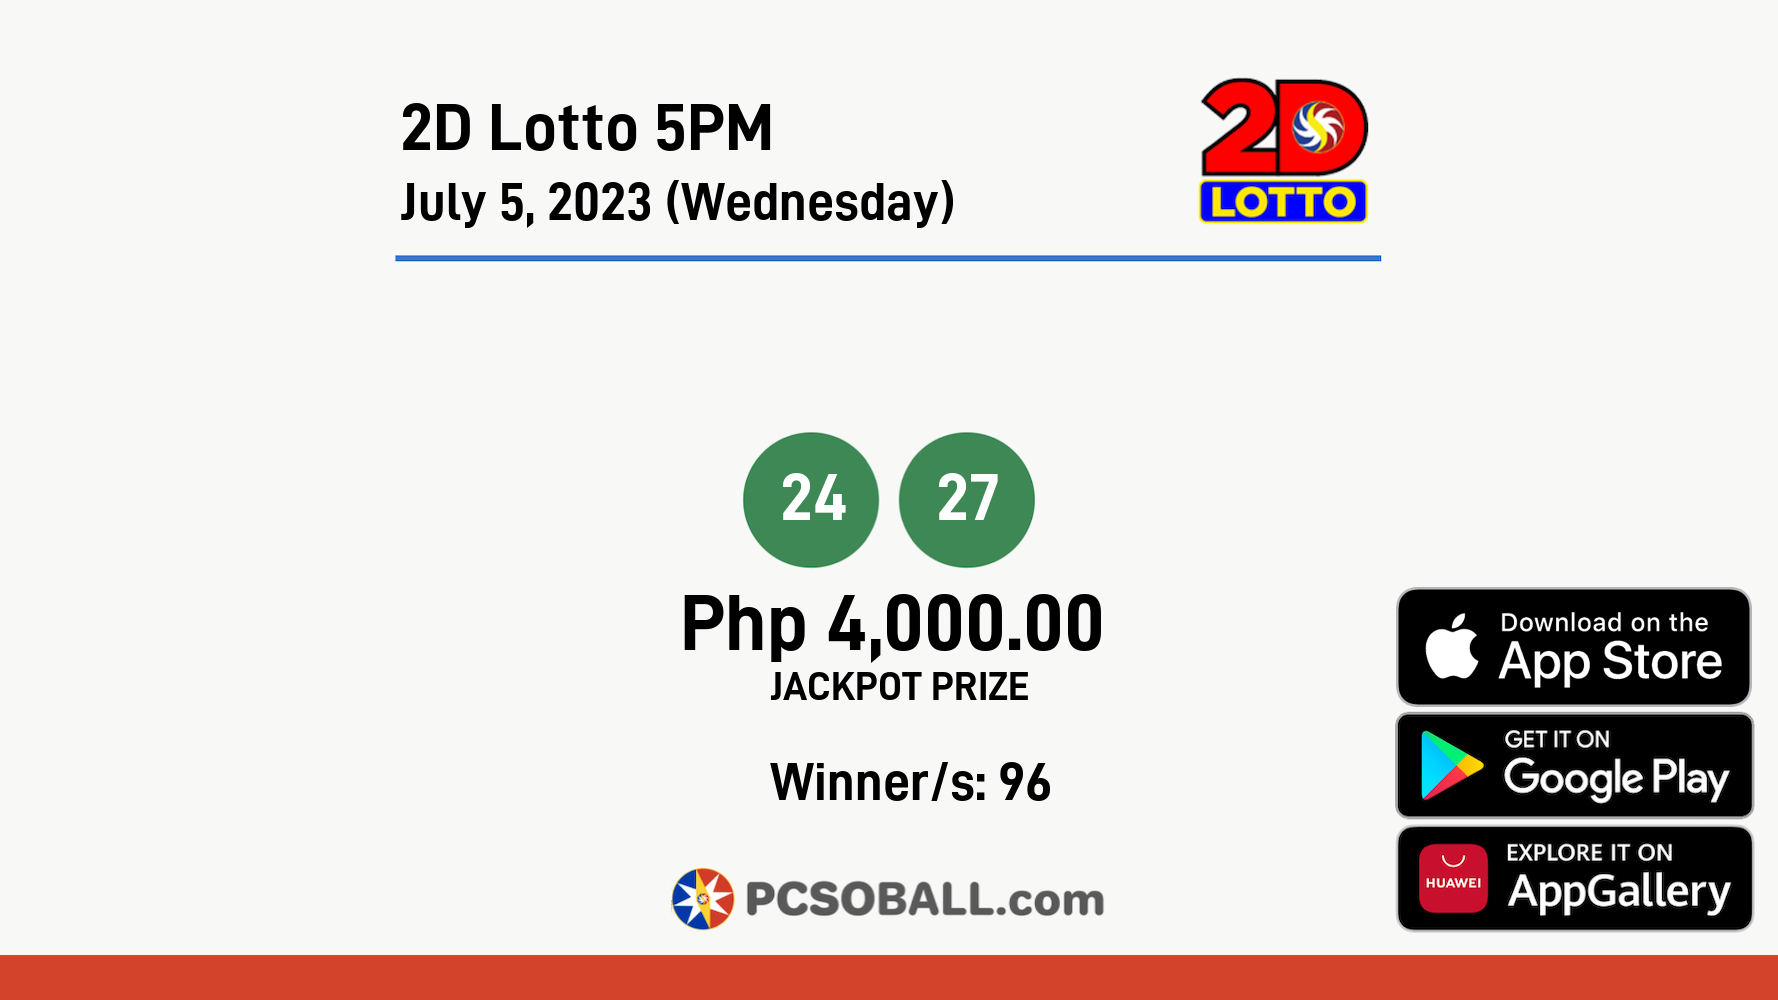 2D Lotto 5PM July 5, 2023 (Wednesday) Result